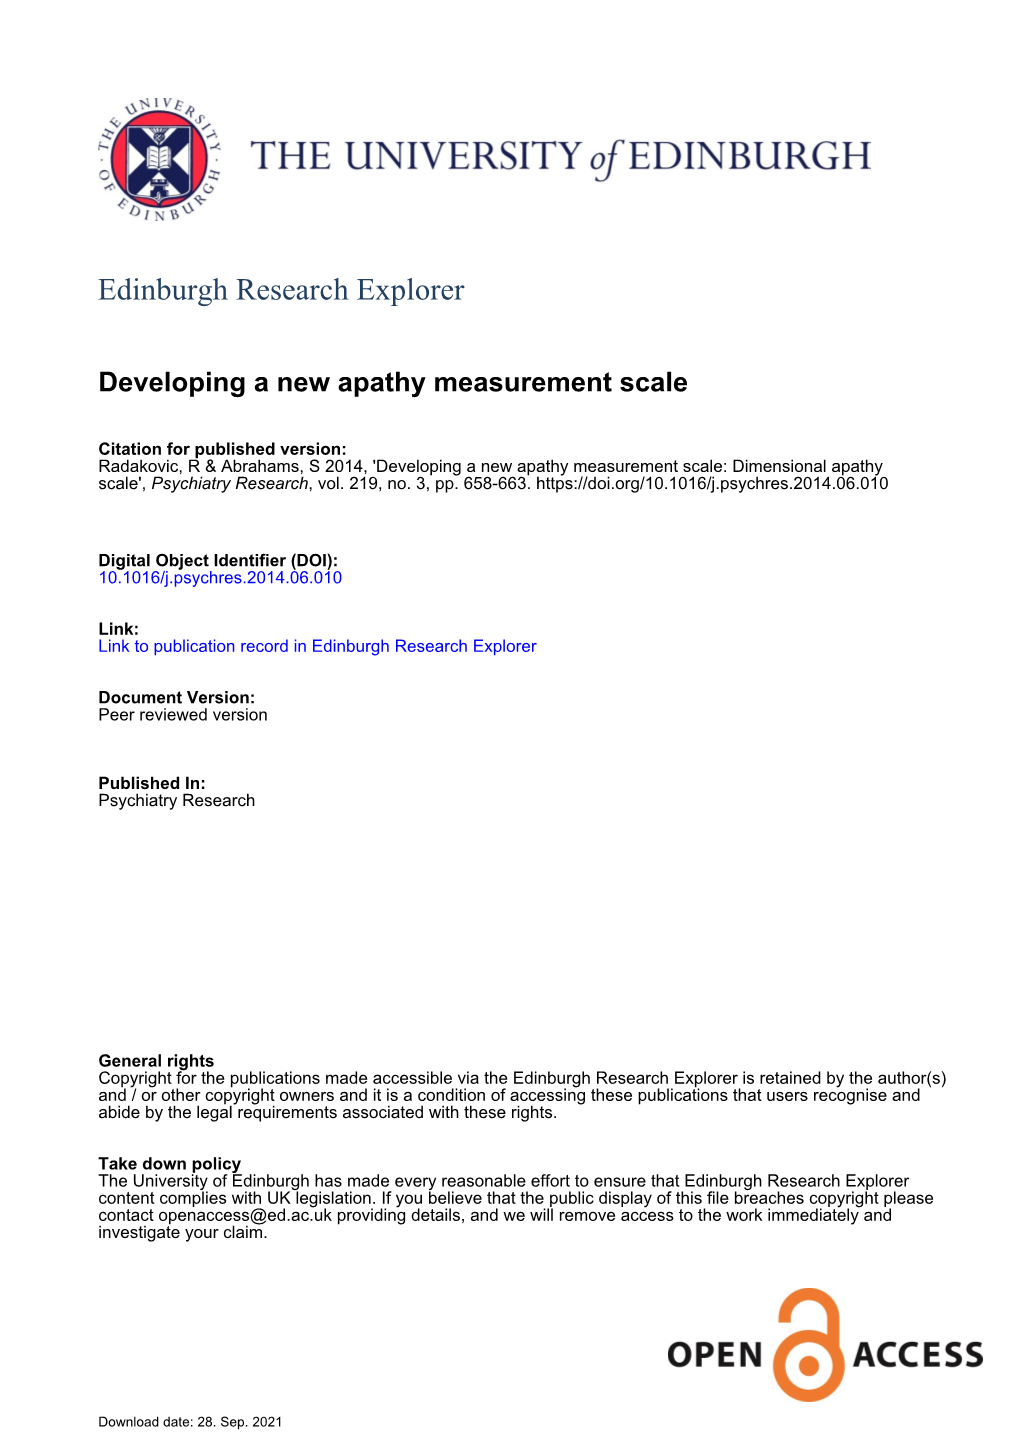 Developing a New Apathy Measurement Scale